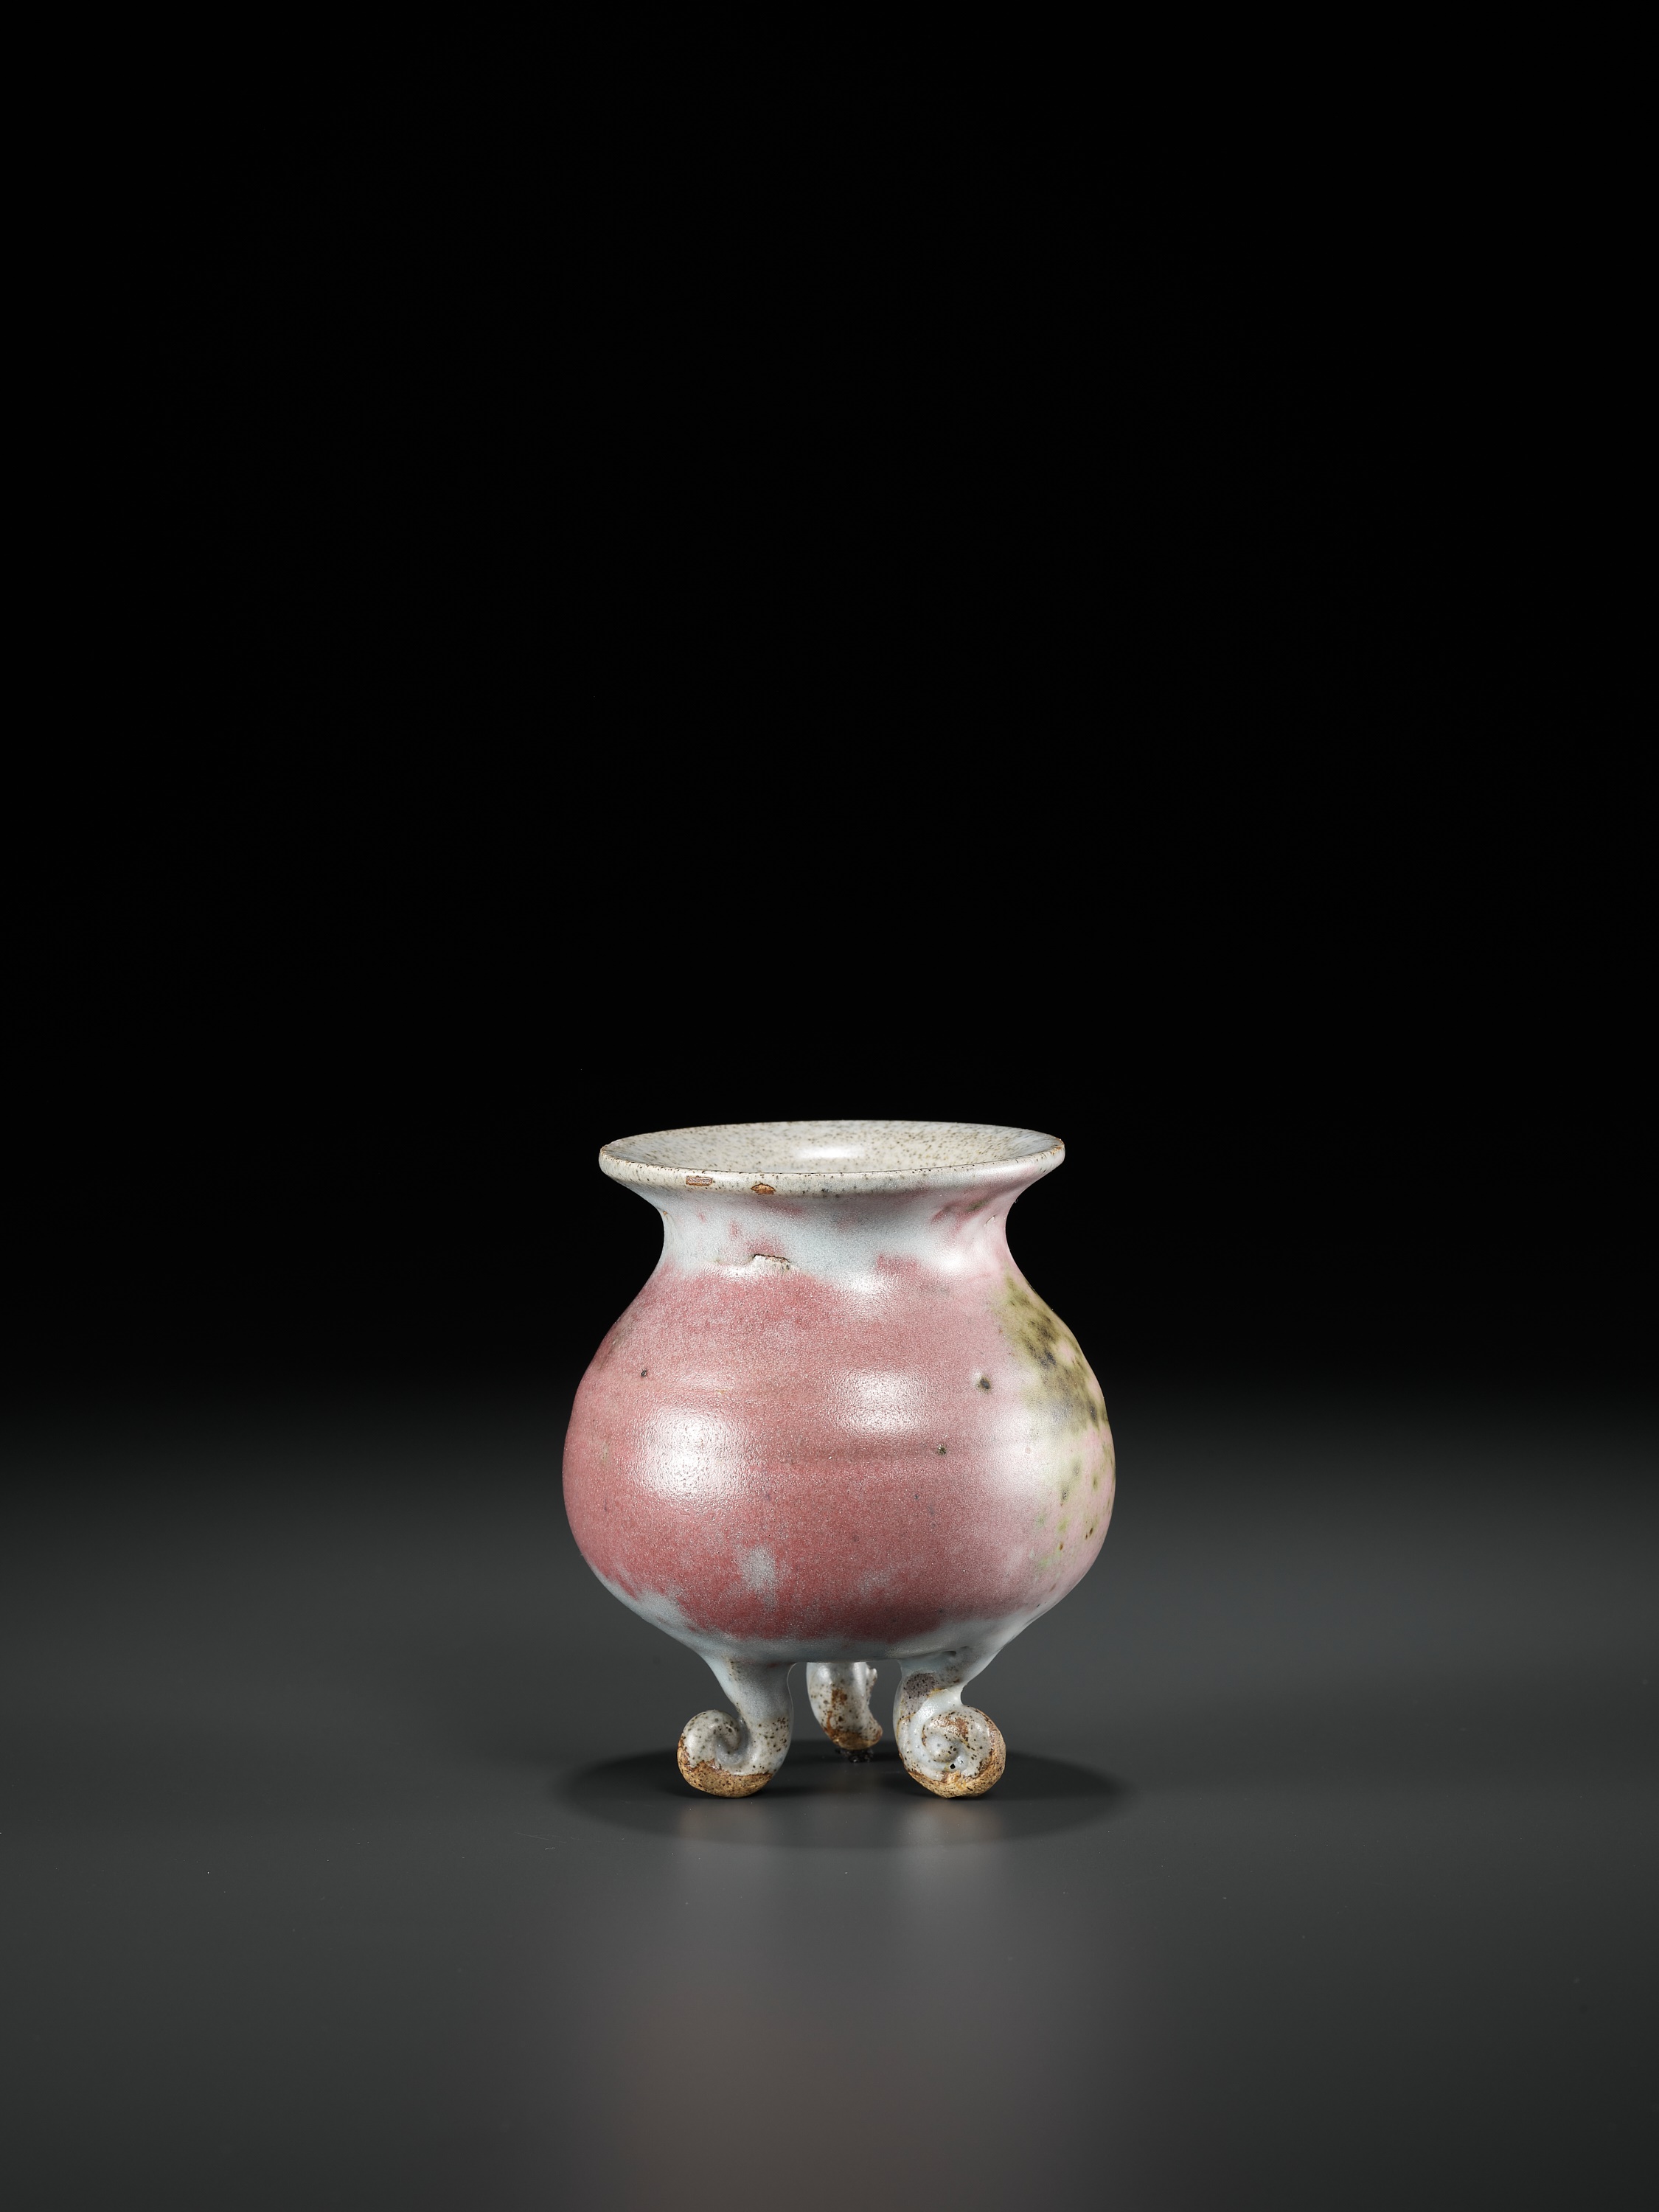 A JUN PURPLE-SPLASHED TRIPOD CENSER, NORTHERN SONG TO YUAN DYNASTY - Image 8 of 11